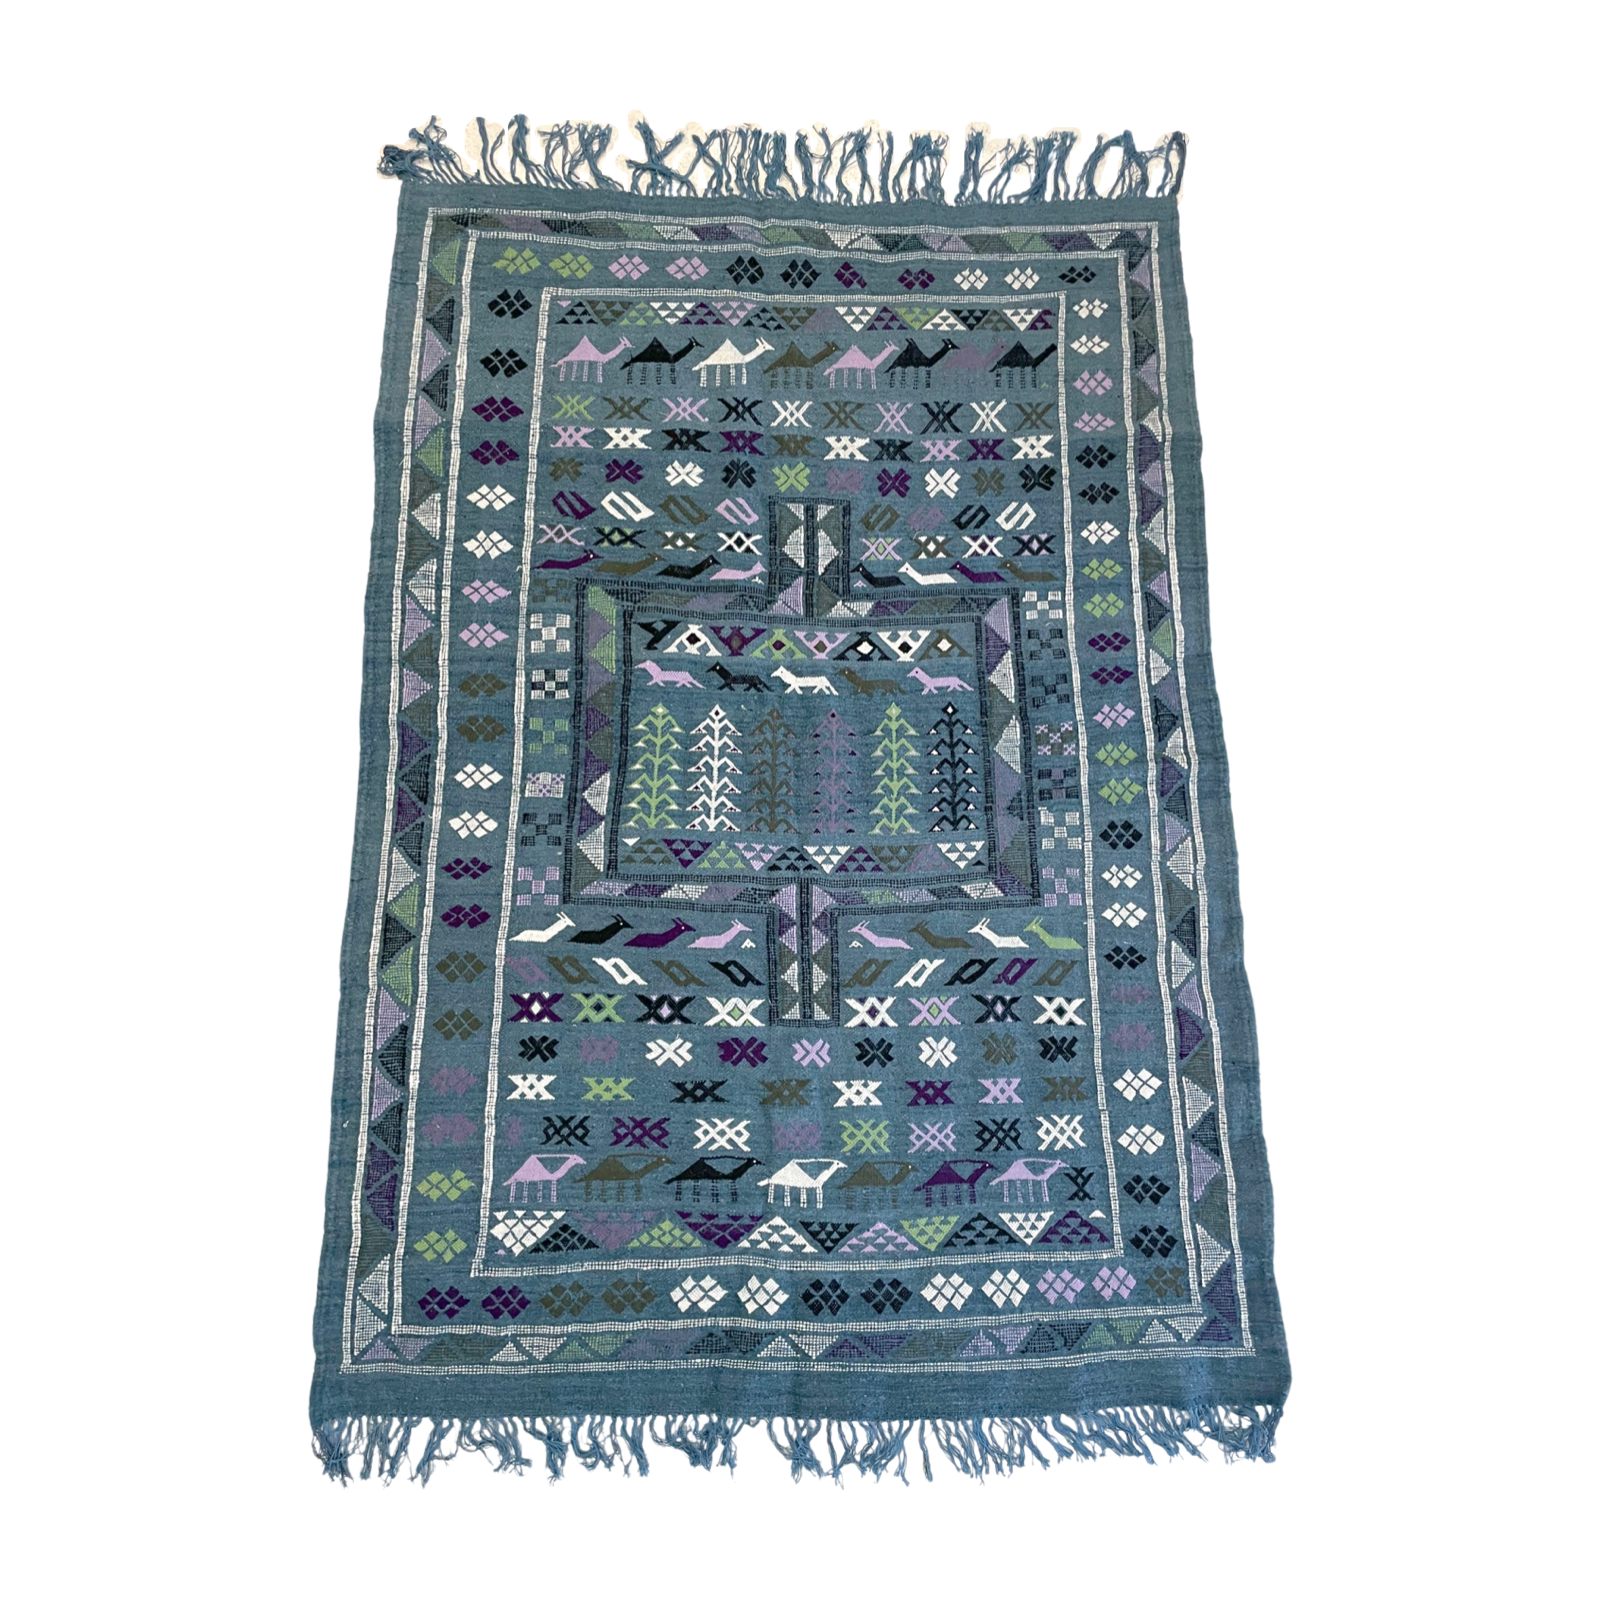 blue grey Moroccan flatweave kilim with woven animal details in purple, white and lime green | Kantara Moroccan Rugs in Los Angeles